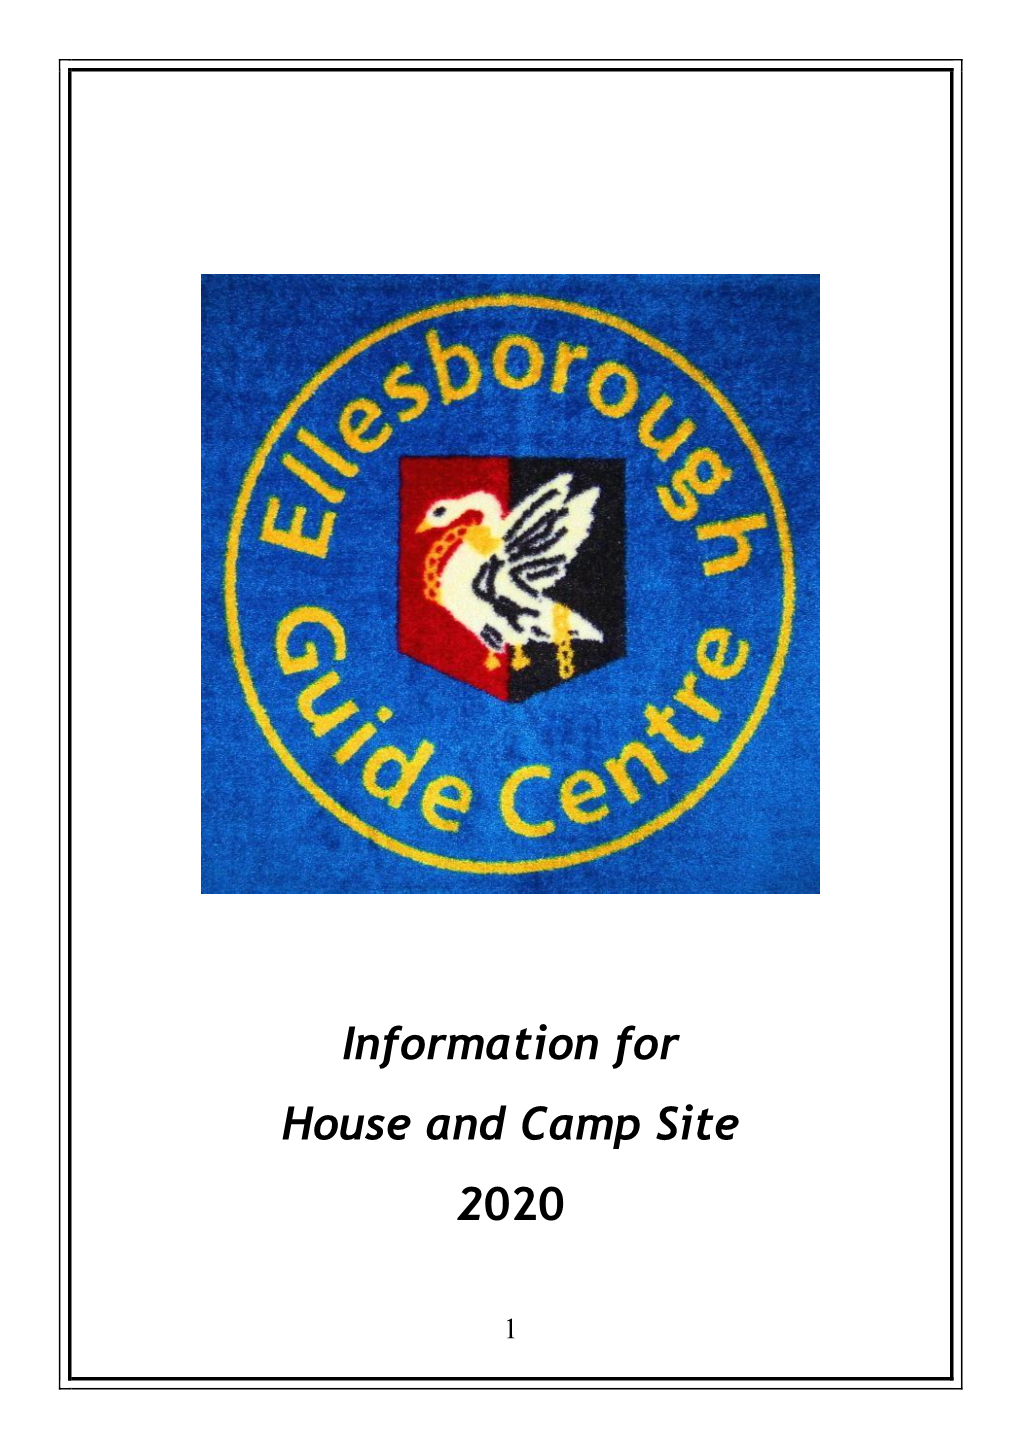 Information for House and Camp Site 2020